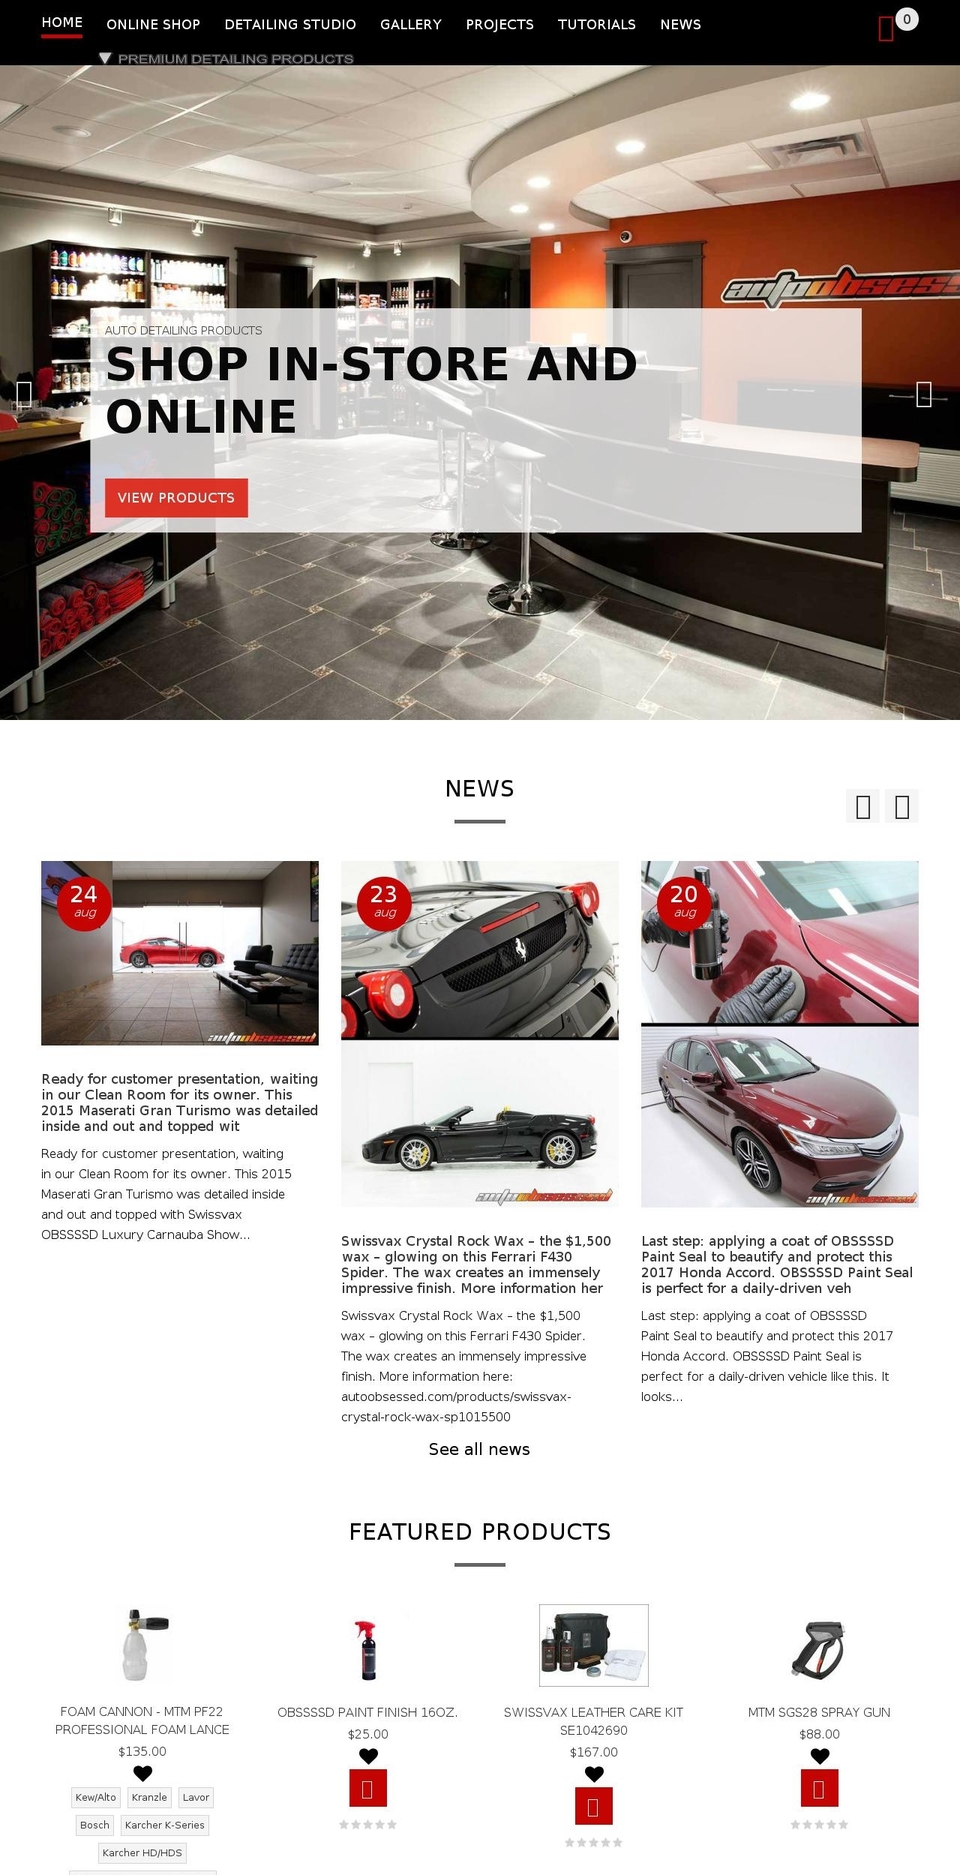 Copy of theme-export-createsimple-inc-myshopify... Shopify theme site example carsobsessed.org